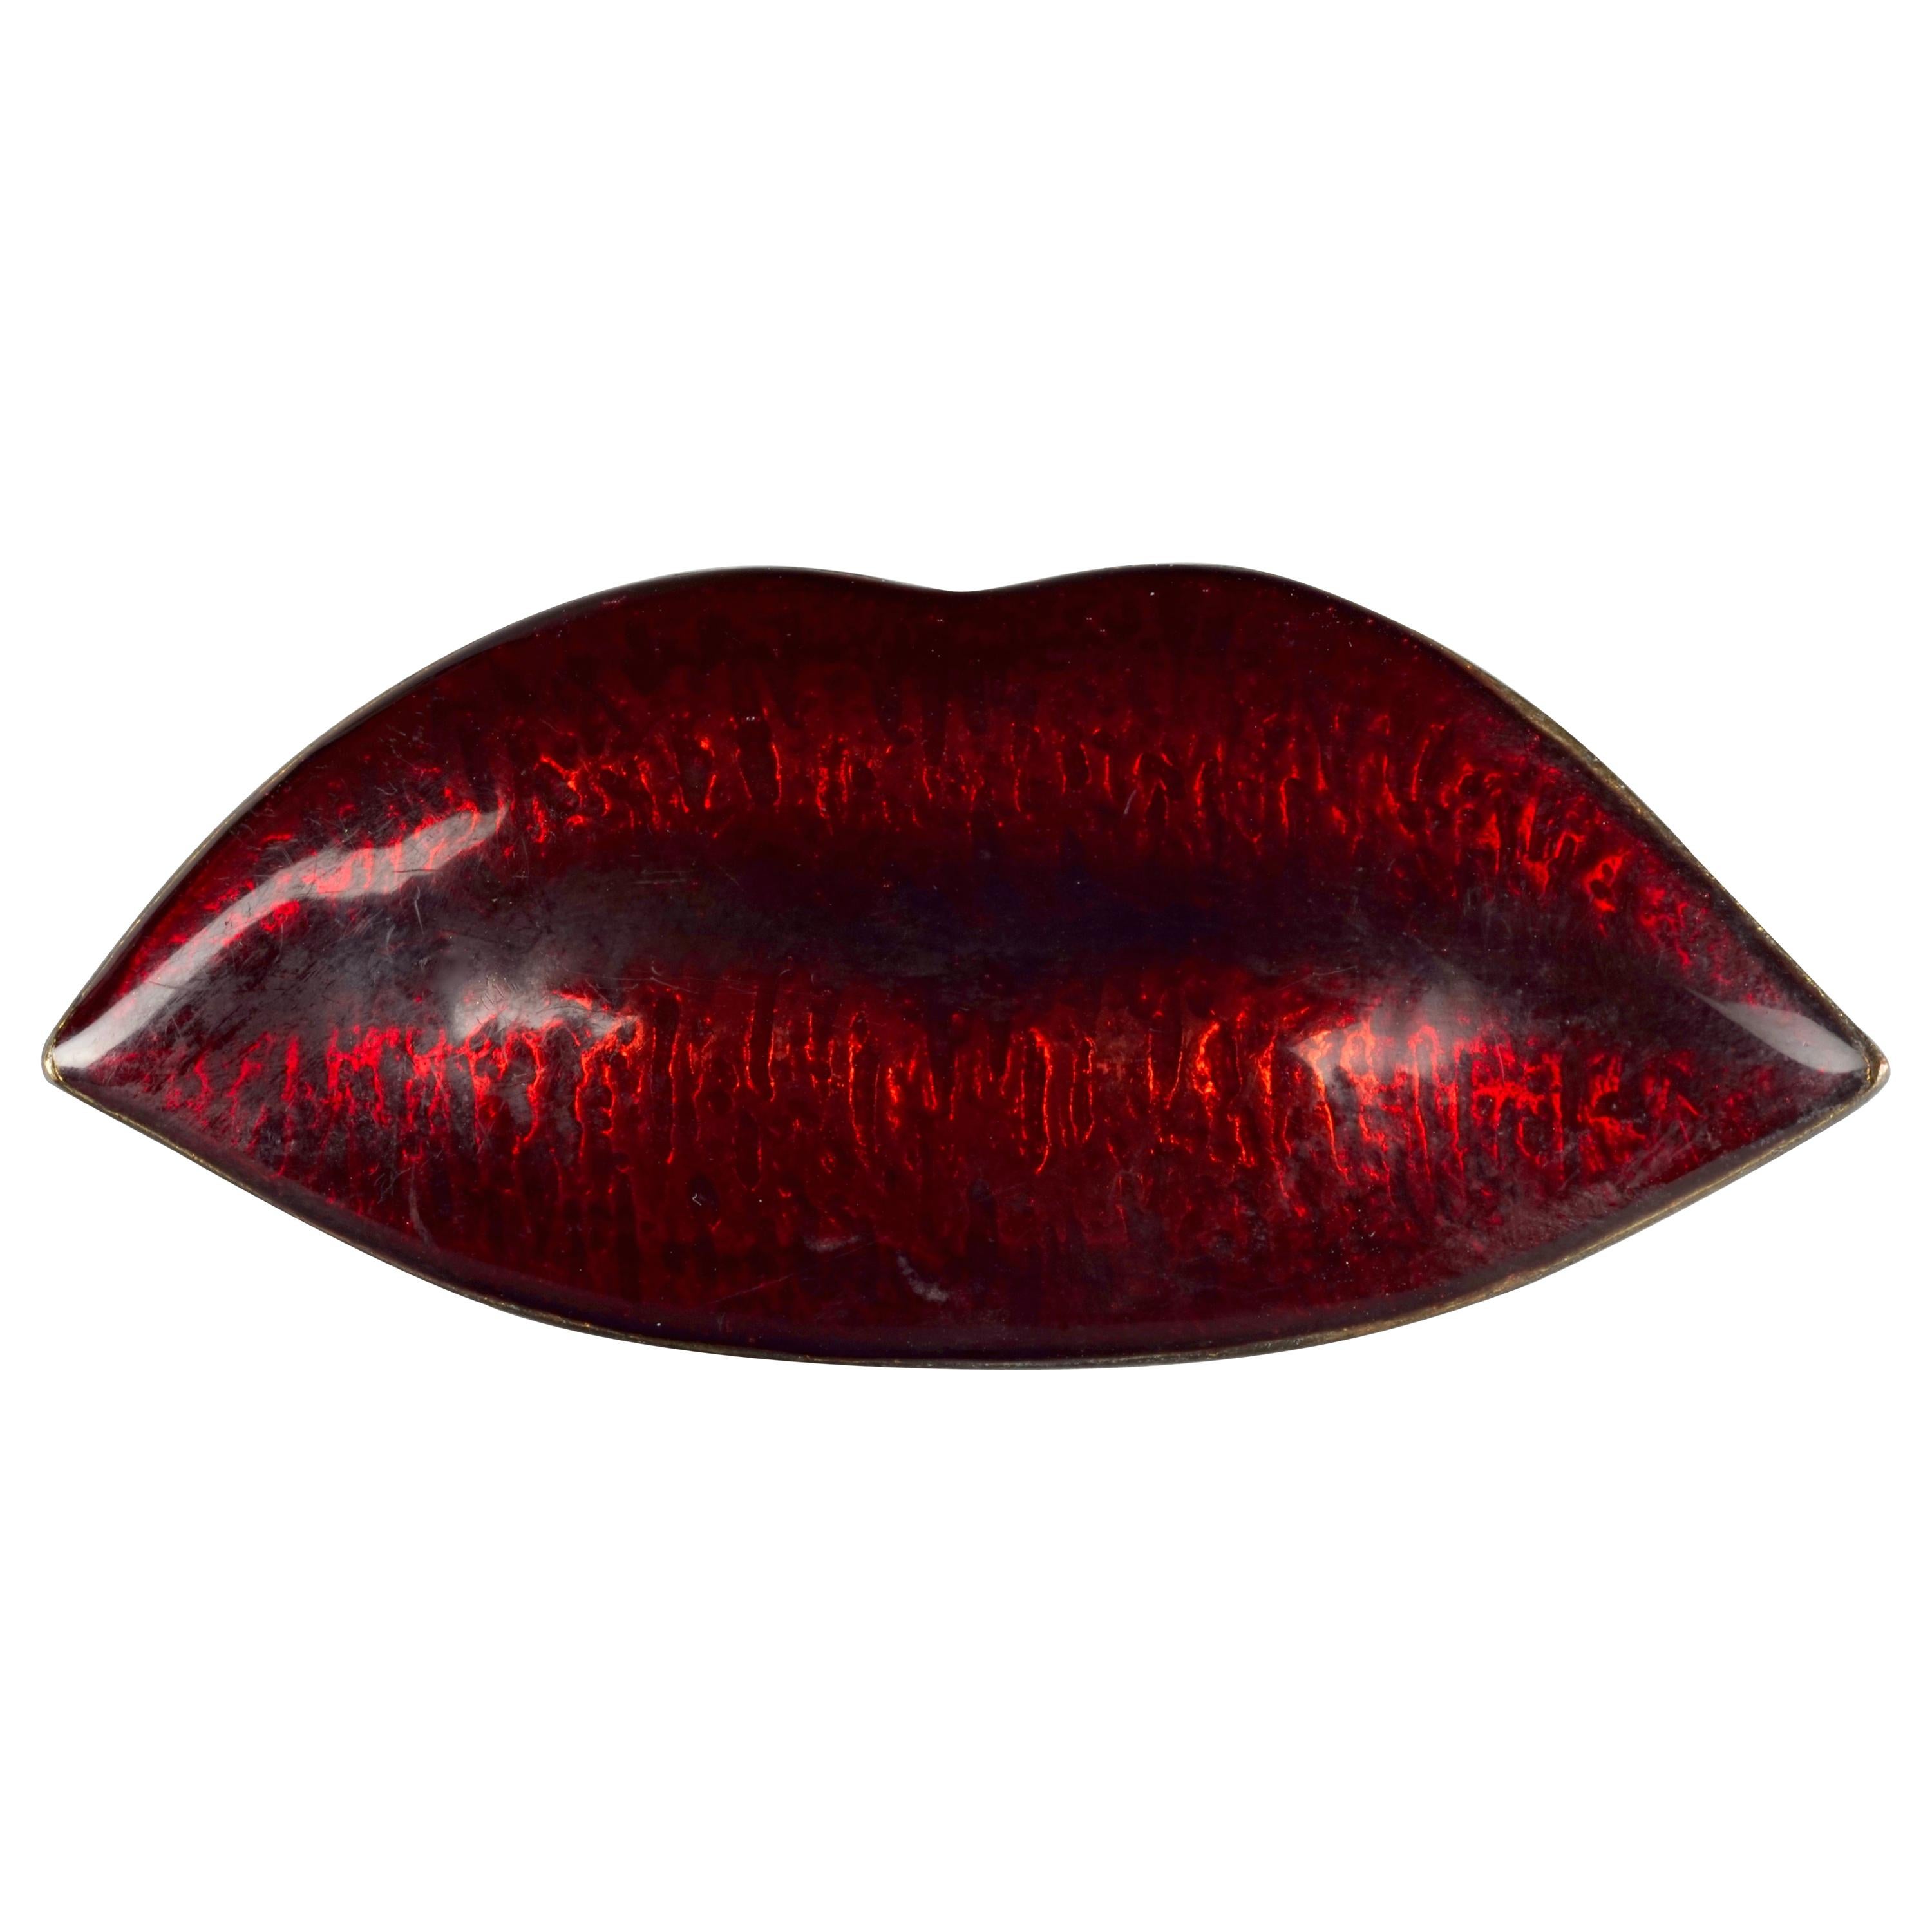 SONIA RYKIEL “Kiss Me” Sultry Red Lips Brooch For Sale